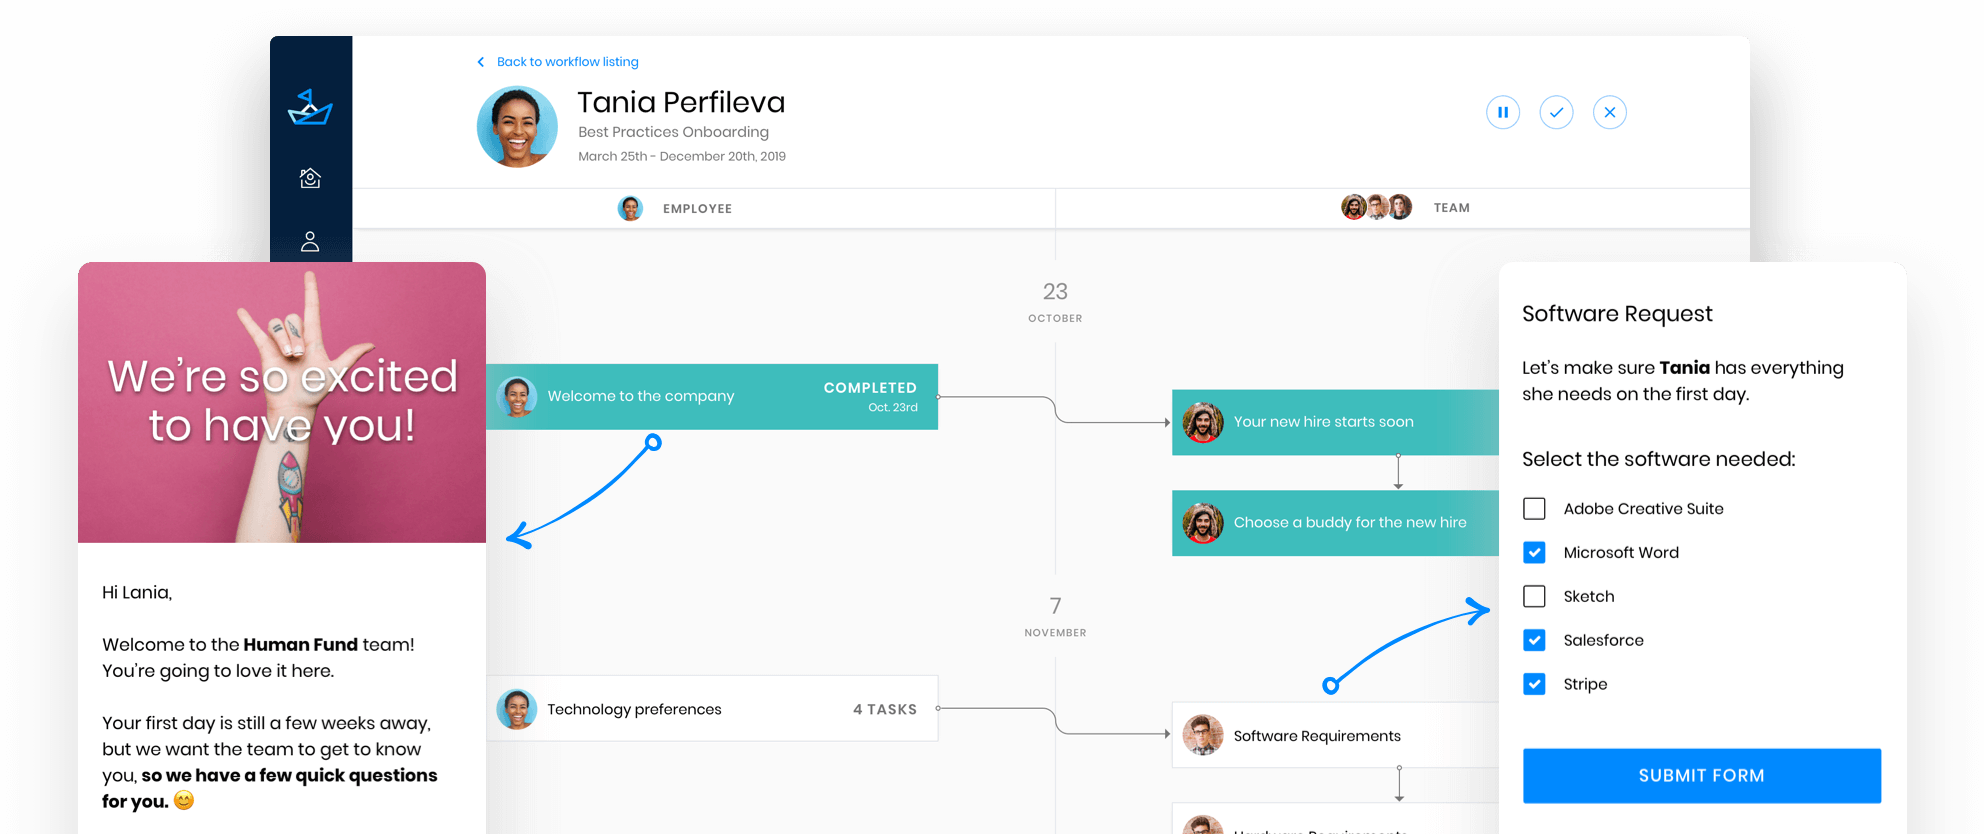 Onboarding workflow welcoming new employee.  Showing excitement to have new employee, tech request setup, and timeline of actions for the new hire. 